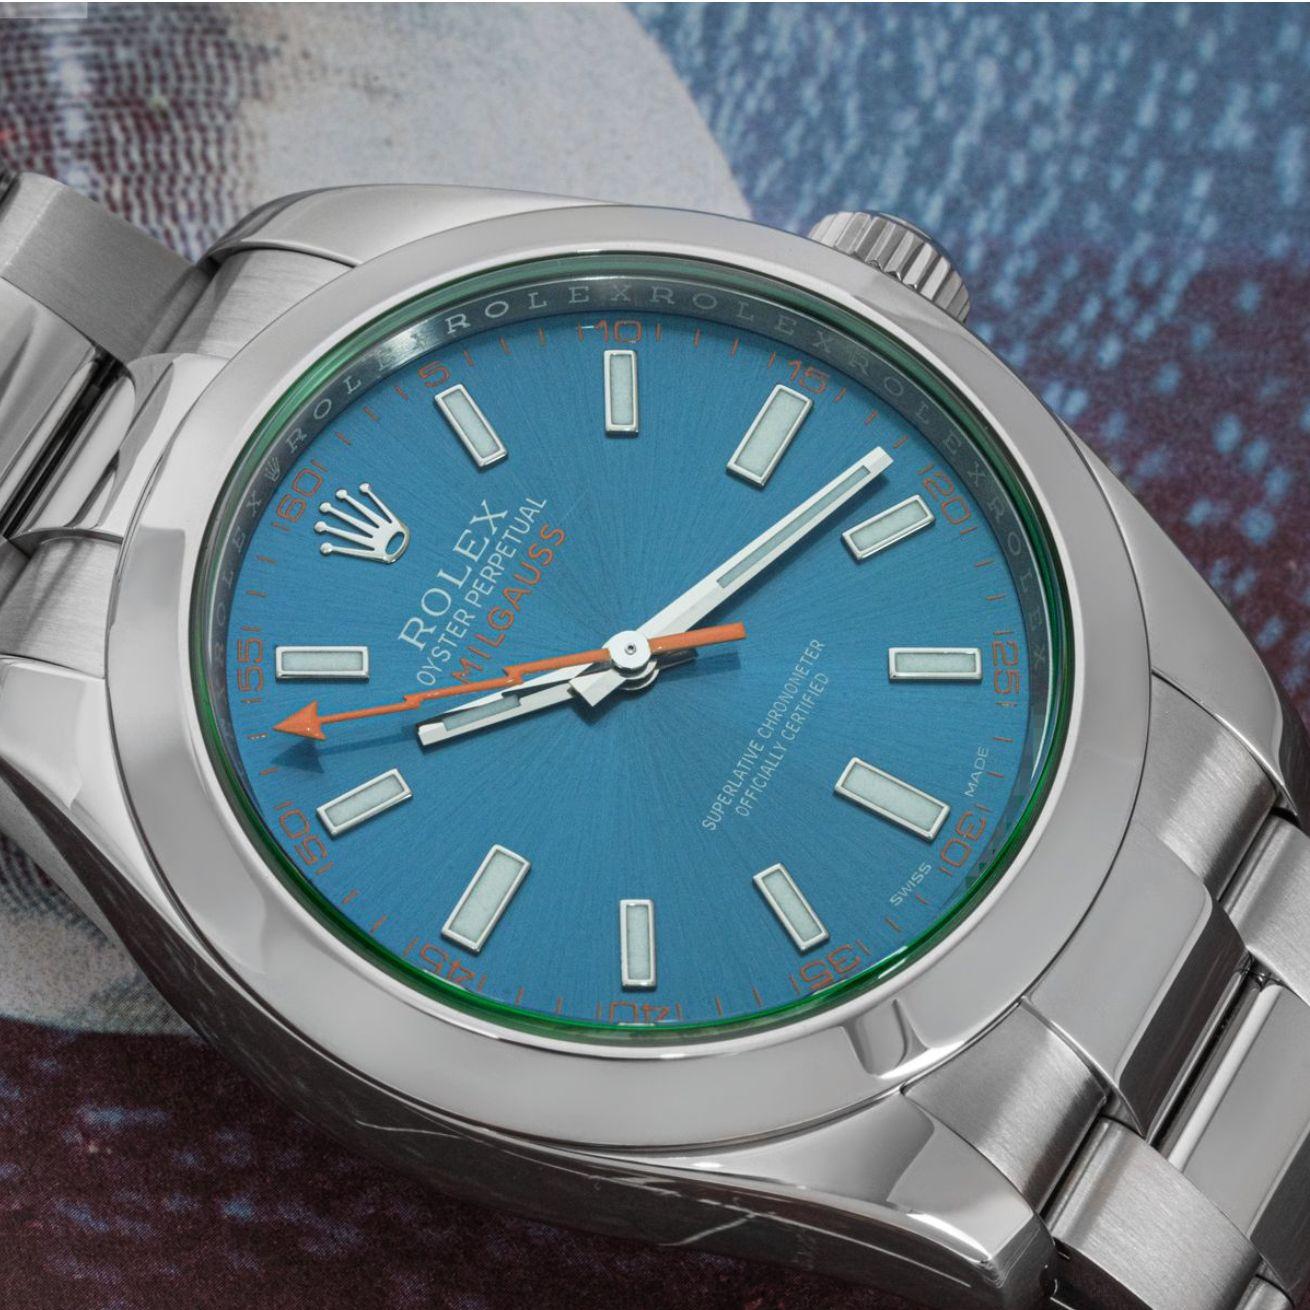 A mens 40mm Milgauss crafted in stainless steel by Rolex. Featuring a distinctive blue dial with an orange second-hand shaped like a lightning bolt and a unique green sapphire crystal which is exclusive to the Rolex Milgauss design.

This piece is